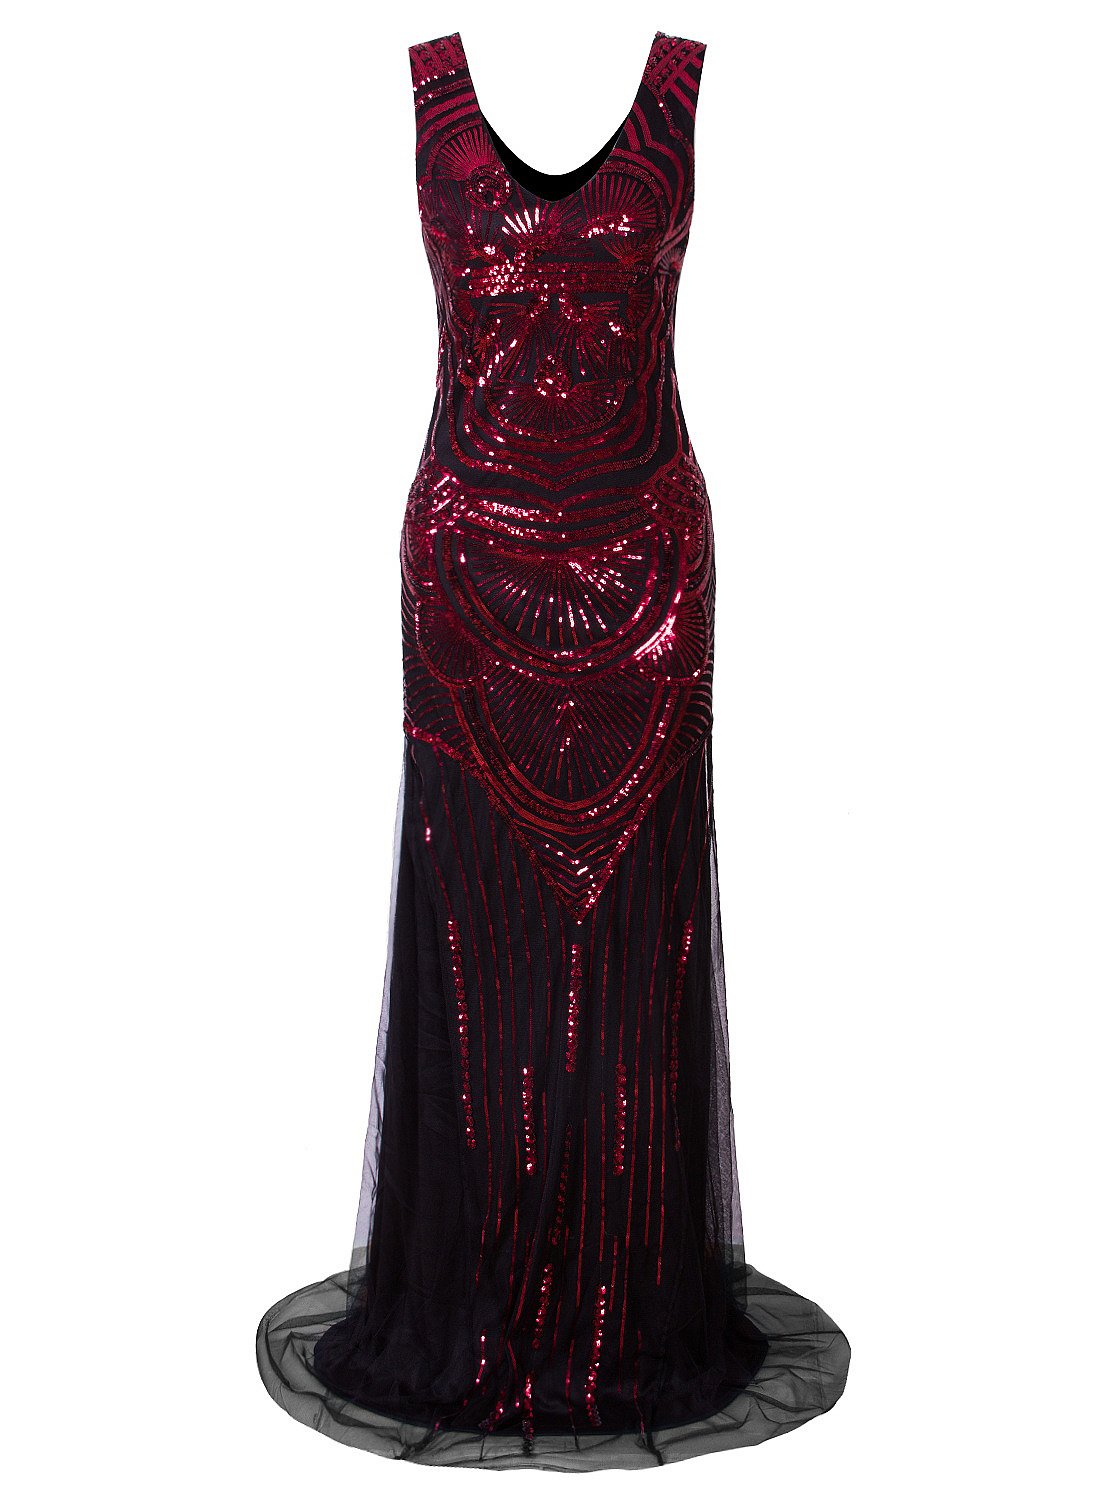 1920s inspired evening gowns